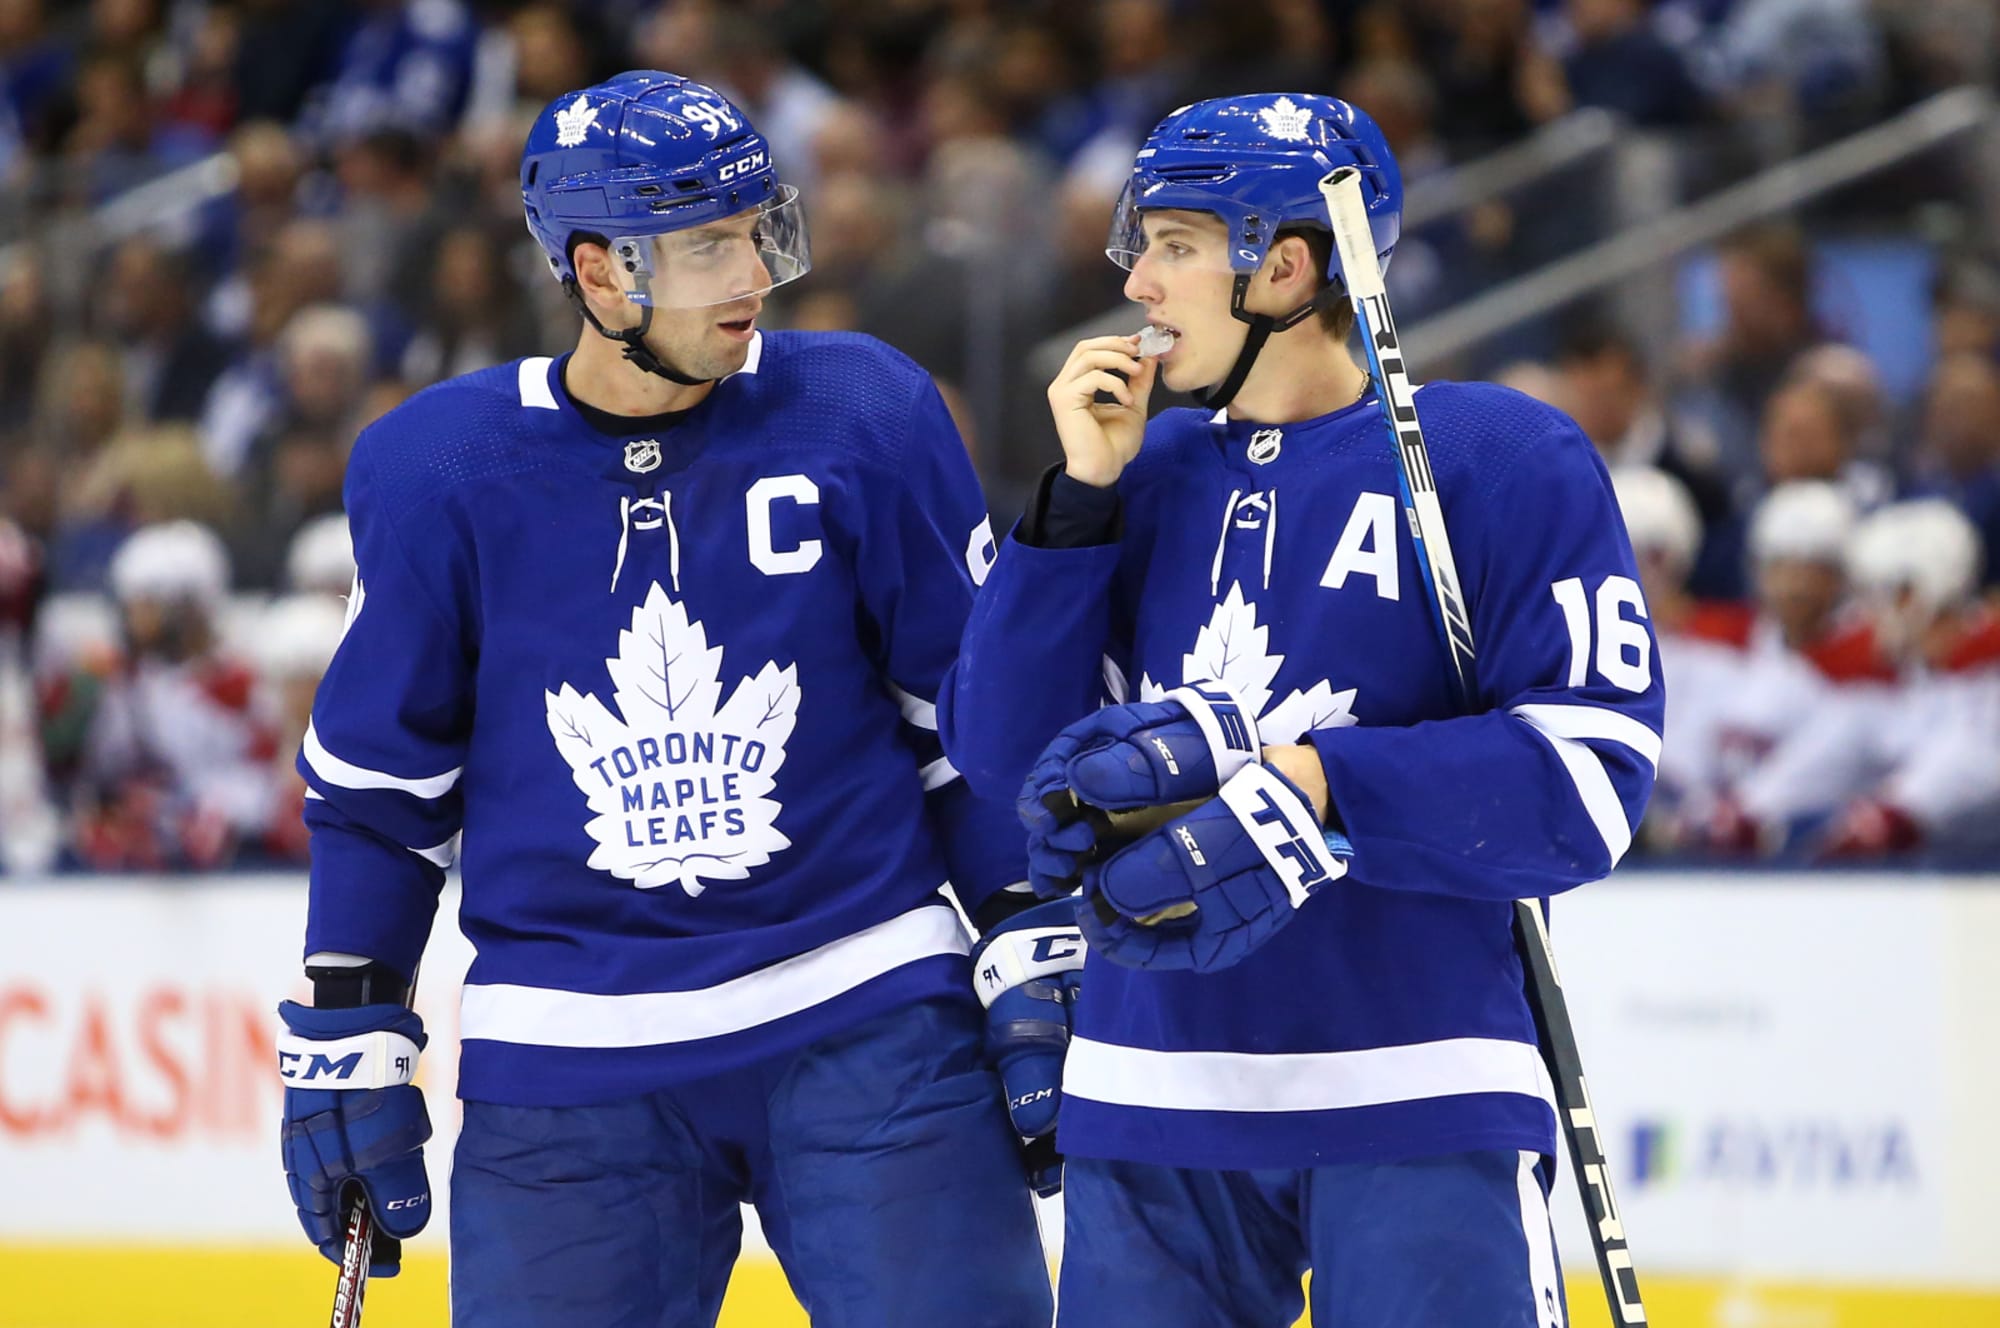 Toronto Maple Leafs: Time is right to reunite Tavares and Marner